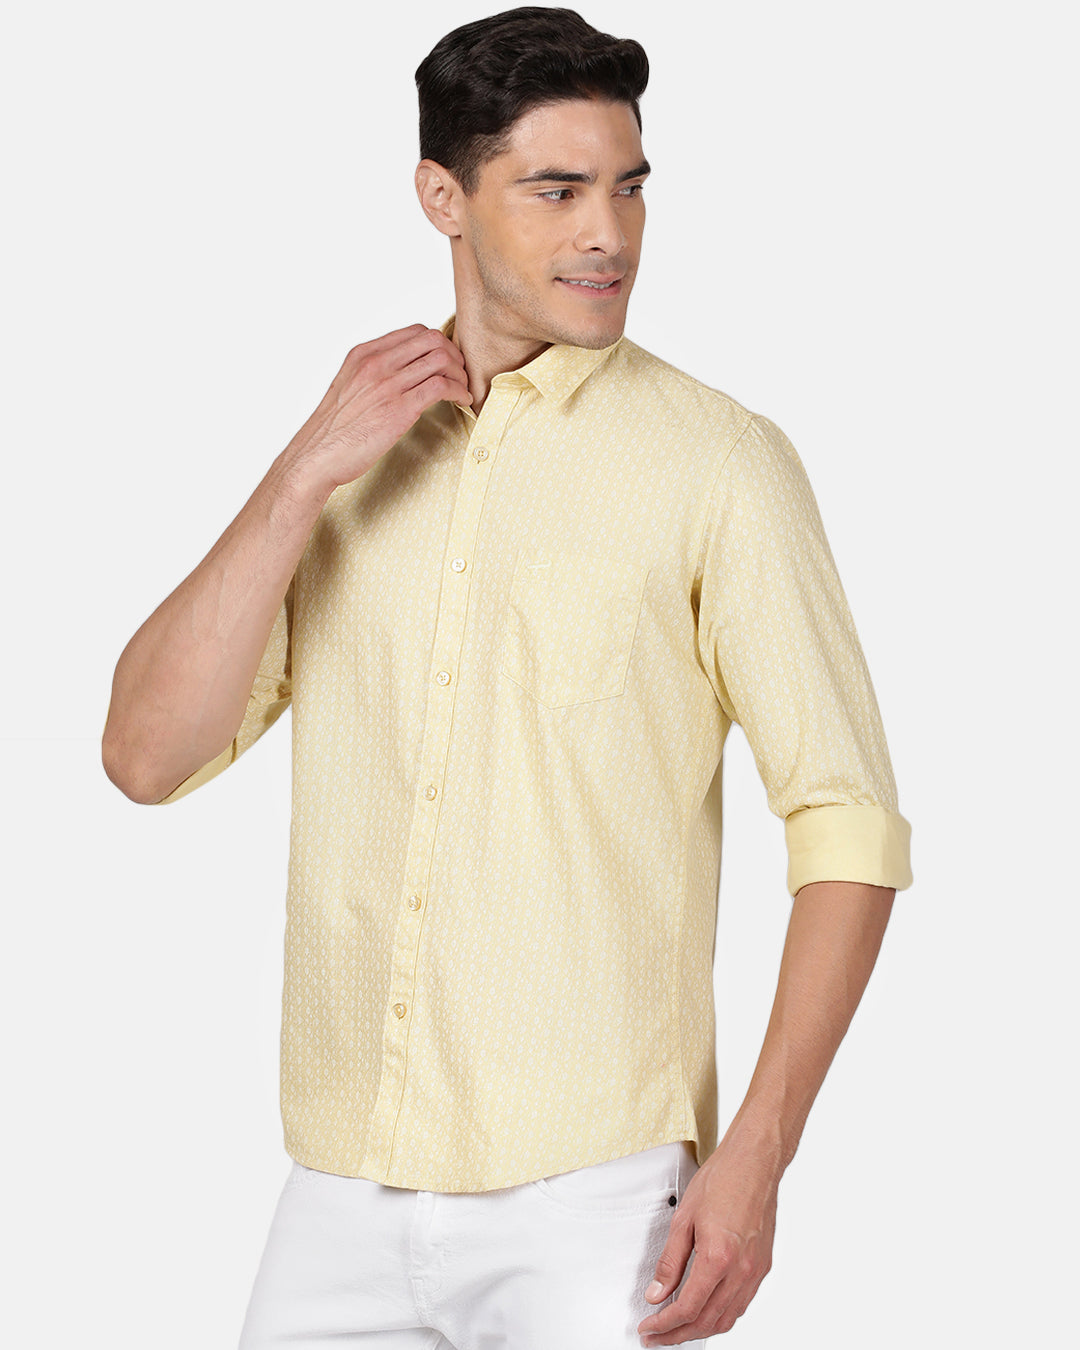 Crocodile Casual Full Sleeve Slim Fit Printed Yellow with Collar Shirt for Men